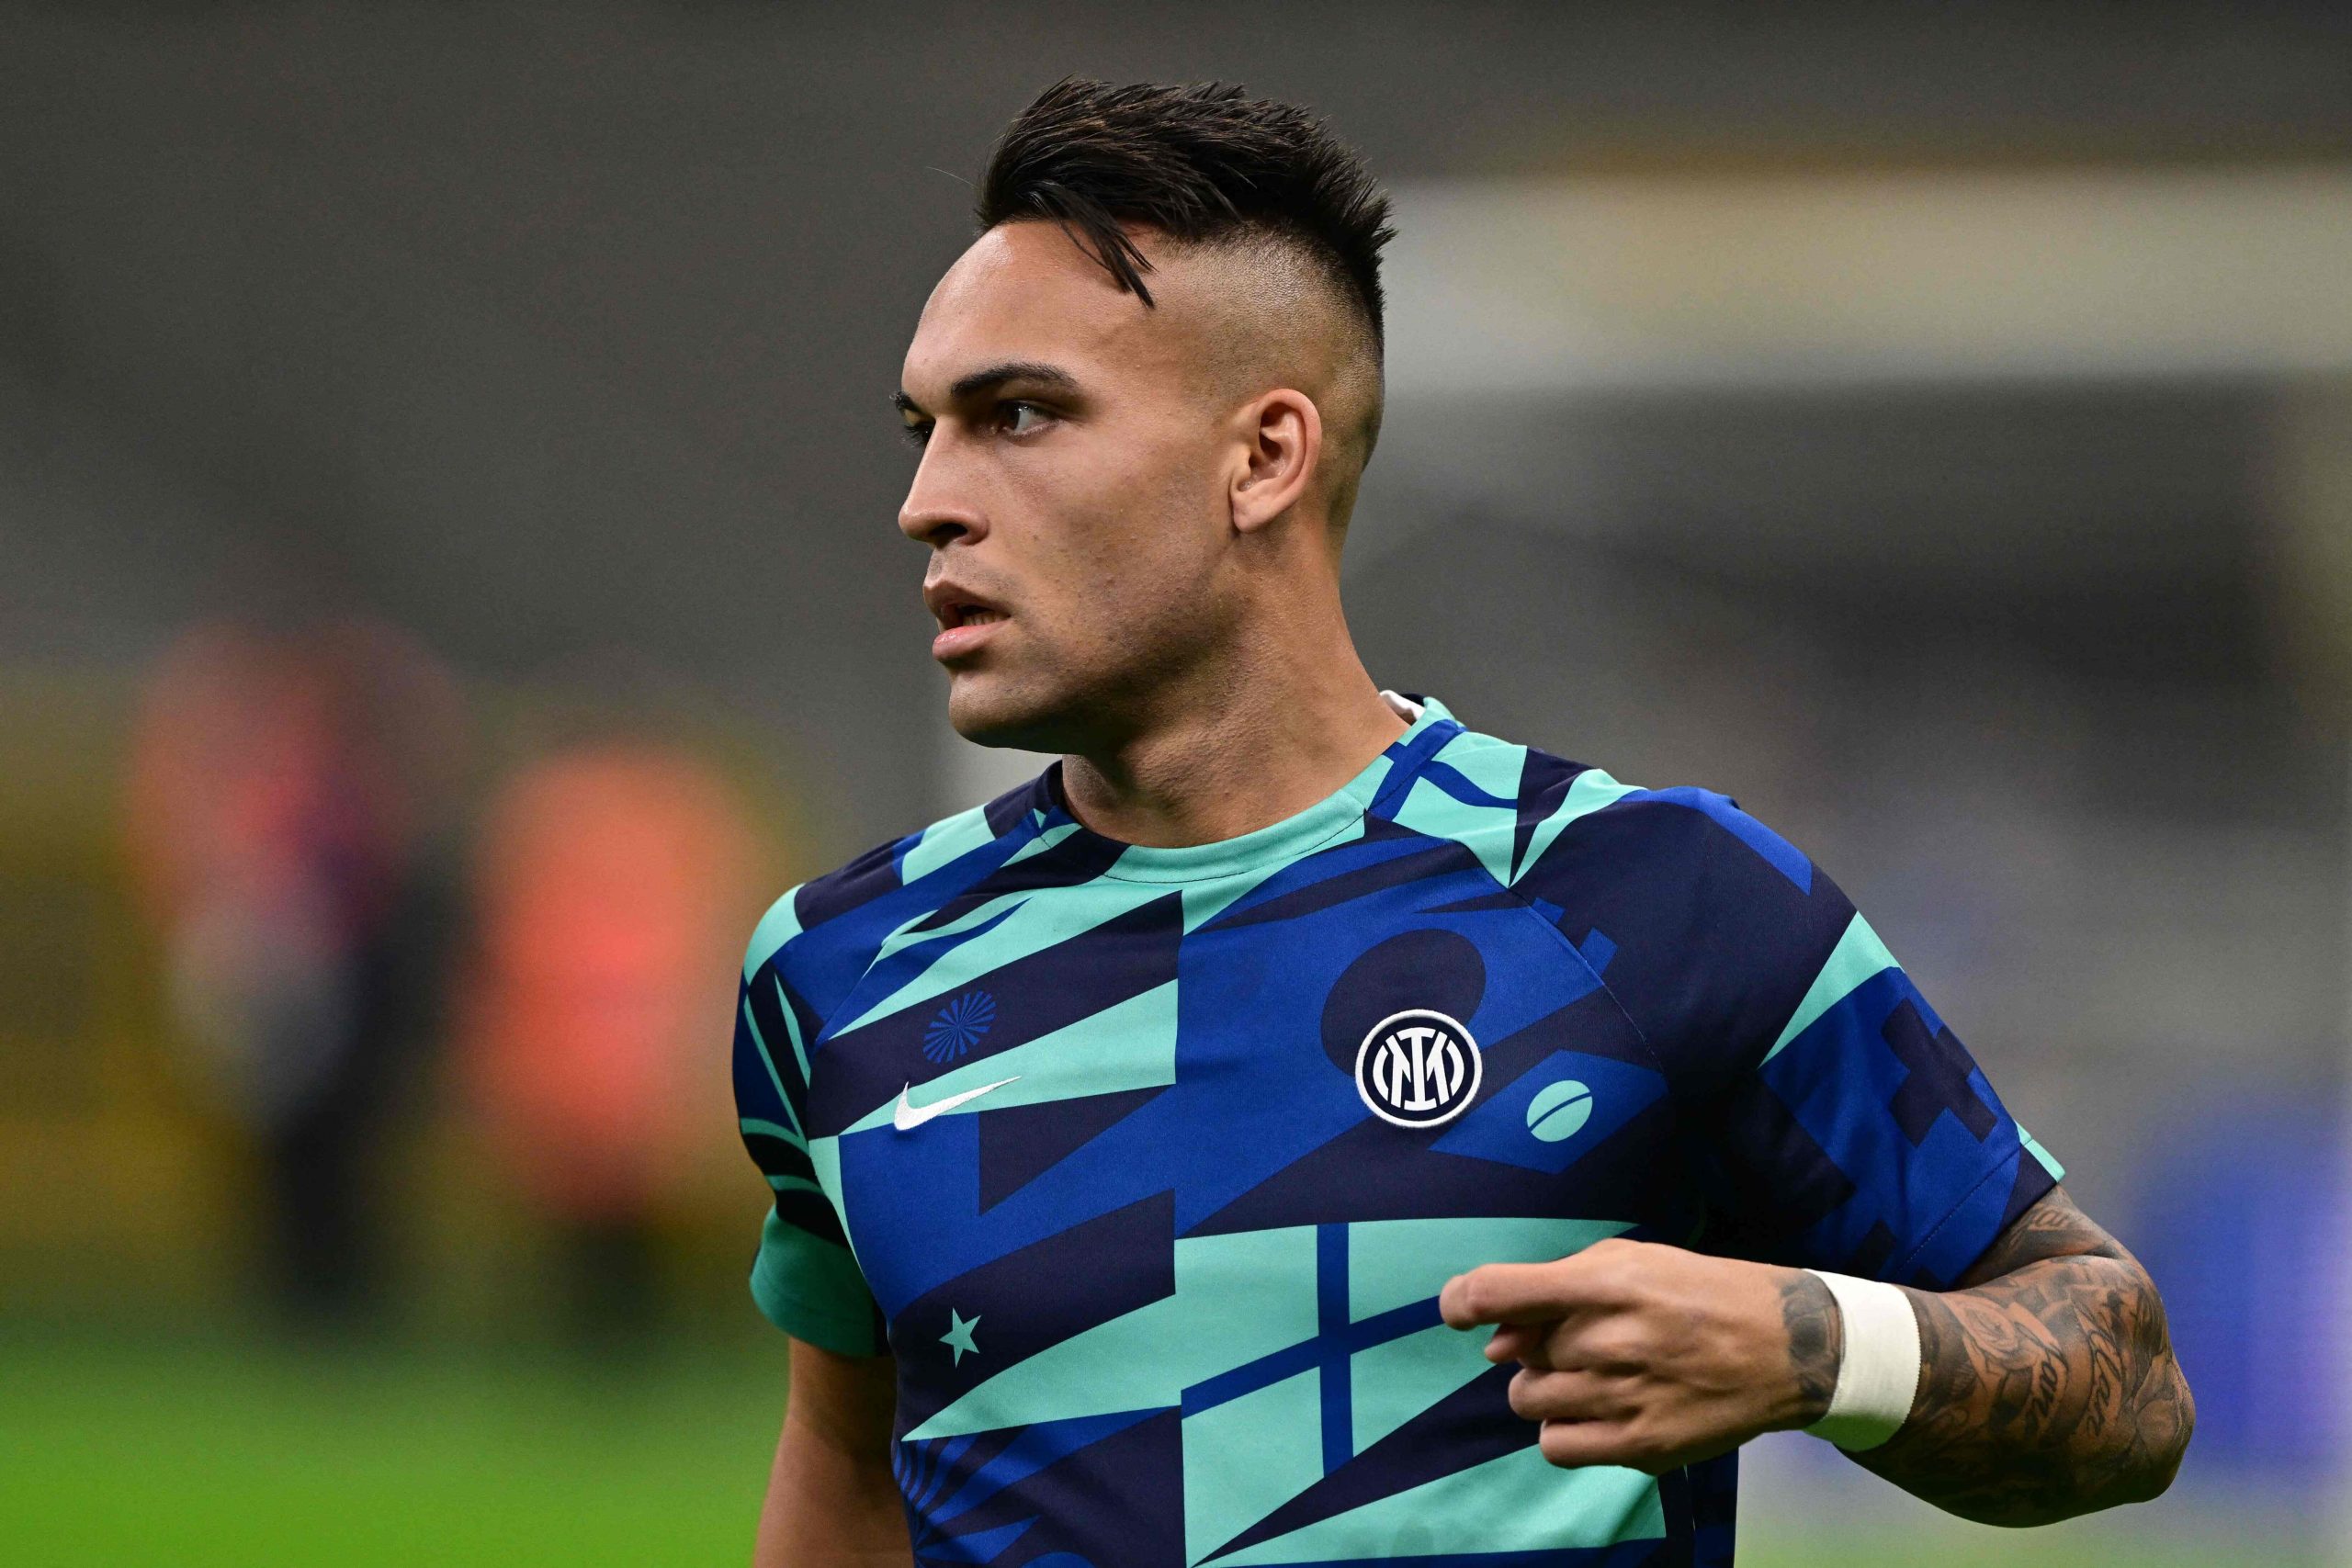 Inter Milan striker Lautaro Martinez attracting interest from Premier League giants Arsenal and Chelsea.